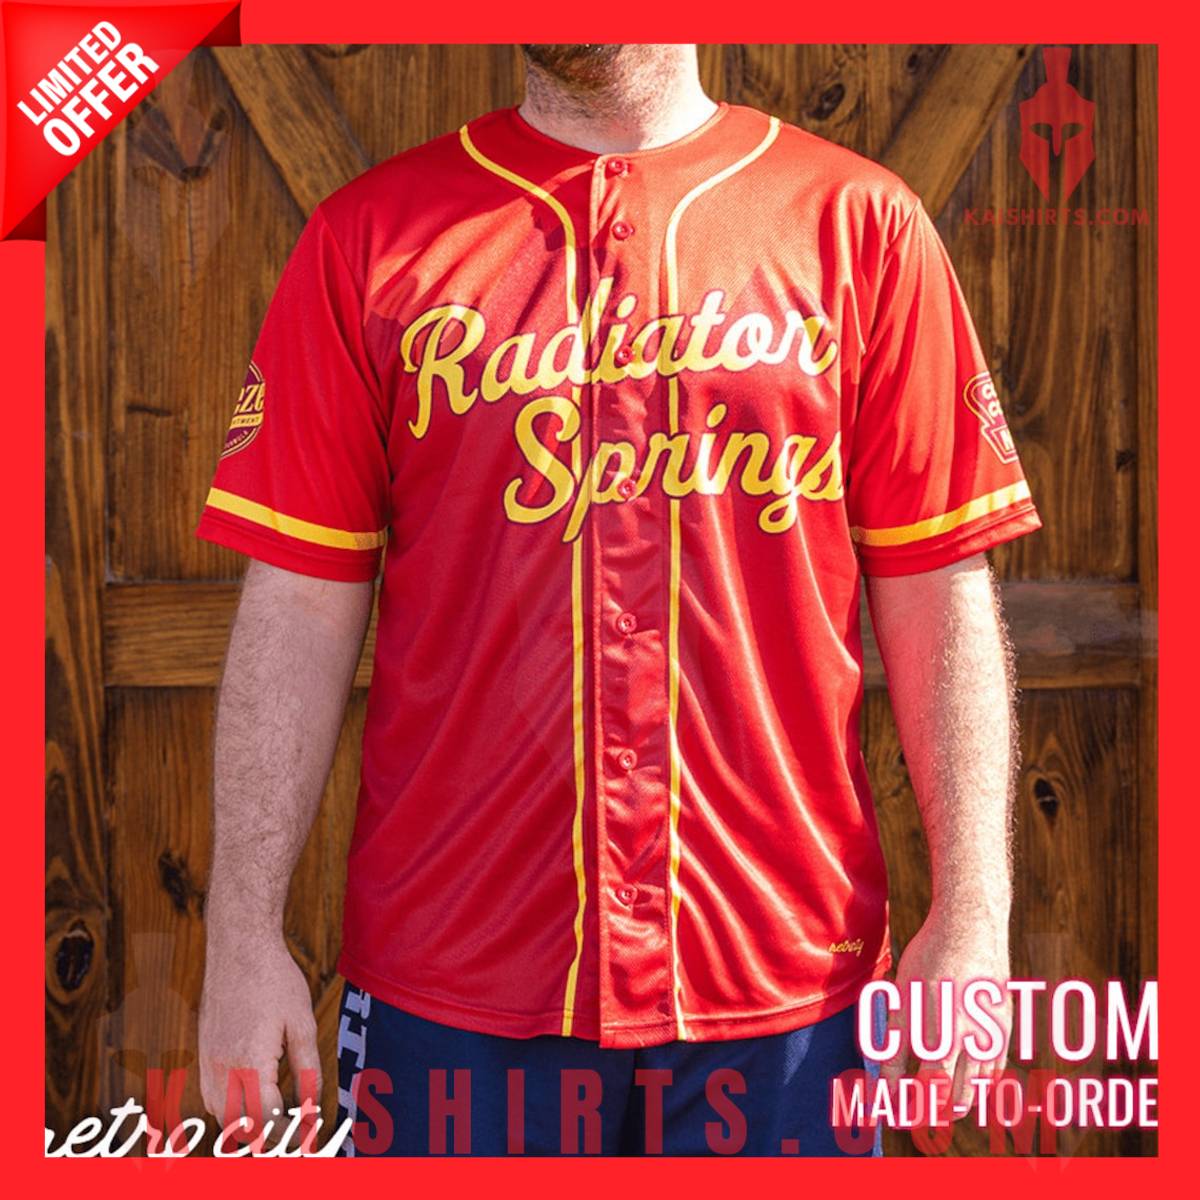 Radiator Springs Lightning McQueen Baseball Jersey's Product Pictures - Kaishirts.com